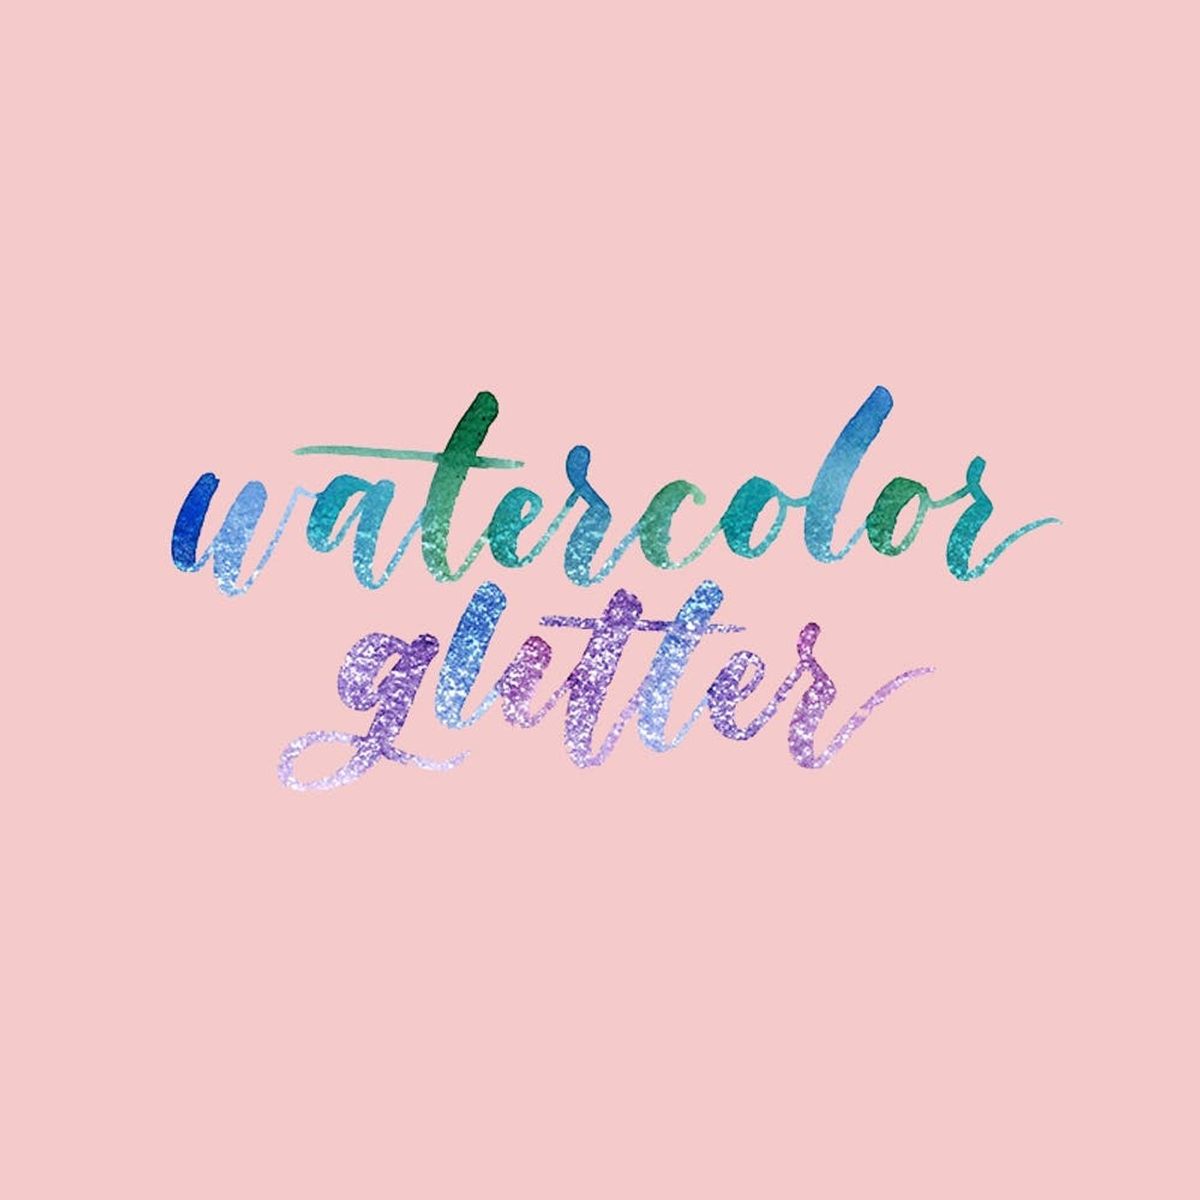 How to Create a Watercolor Glitter Effect in Photoshop